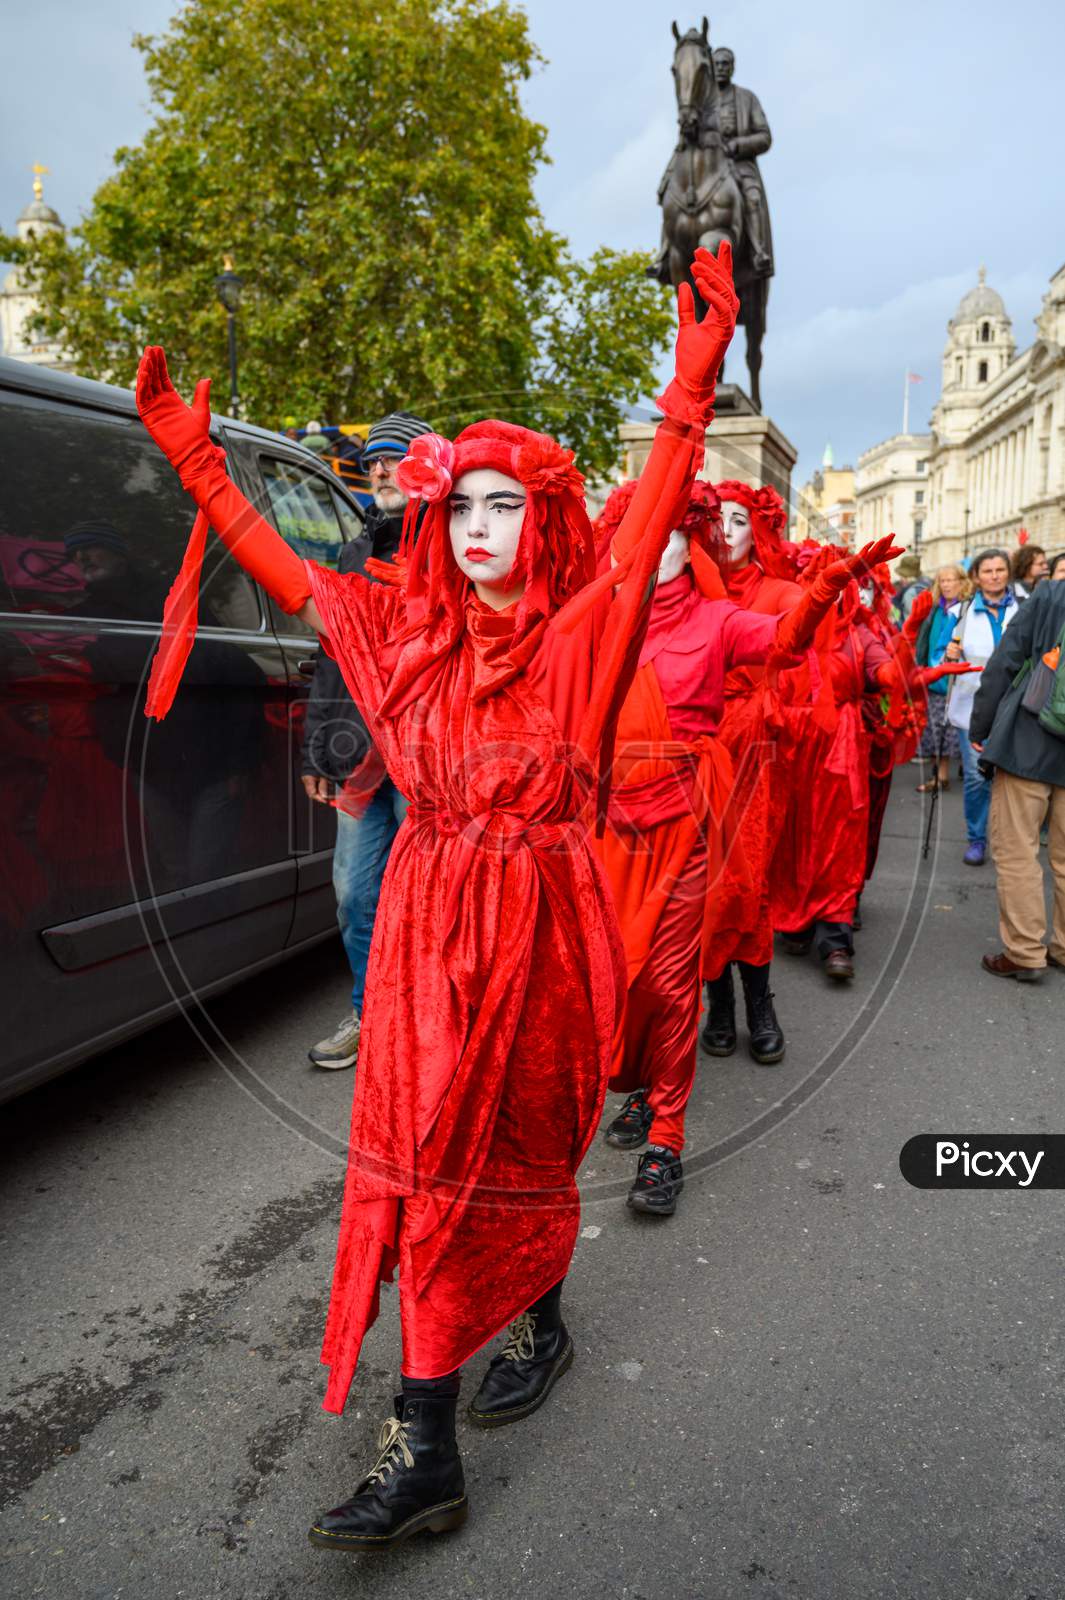 Full Length, Vertical Shot Of Red Brigade Protesters At An Extinction Rebellion Protest March Near Horse Guards Parade